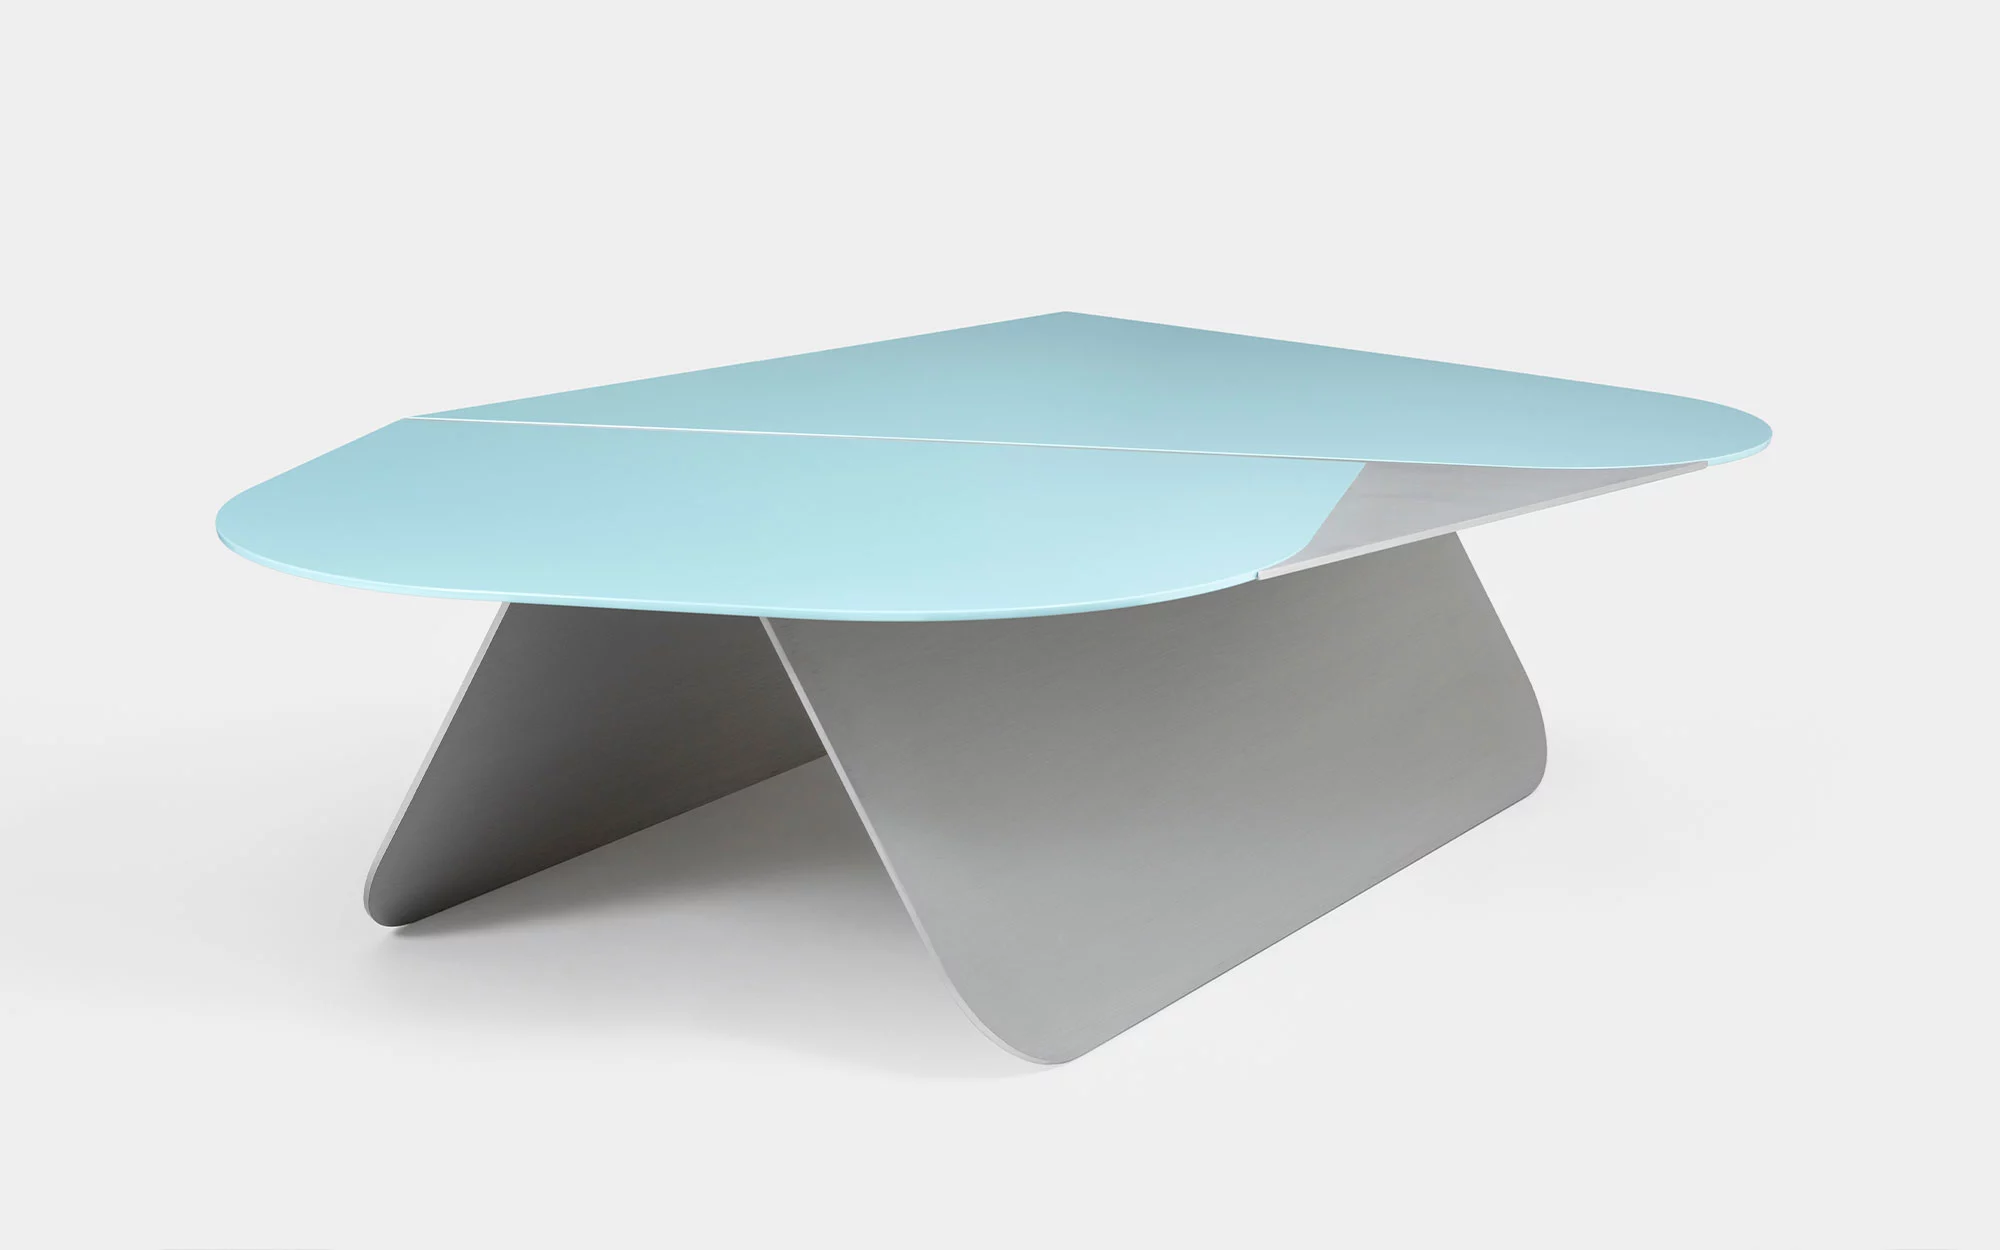 Large DB Coffee Table - Pierre Charpin - @home.